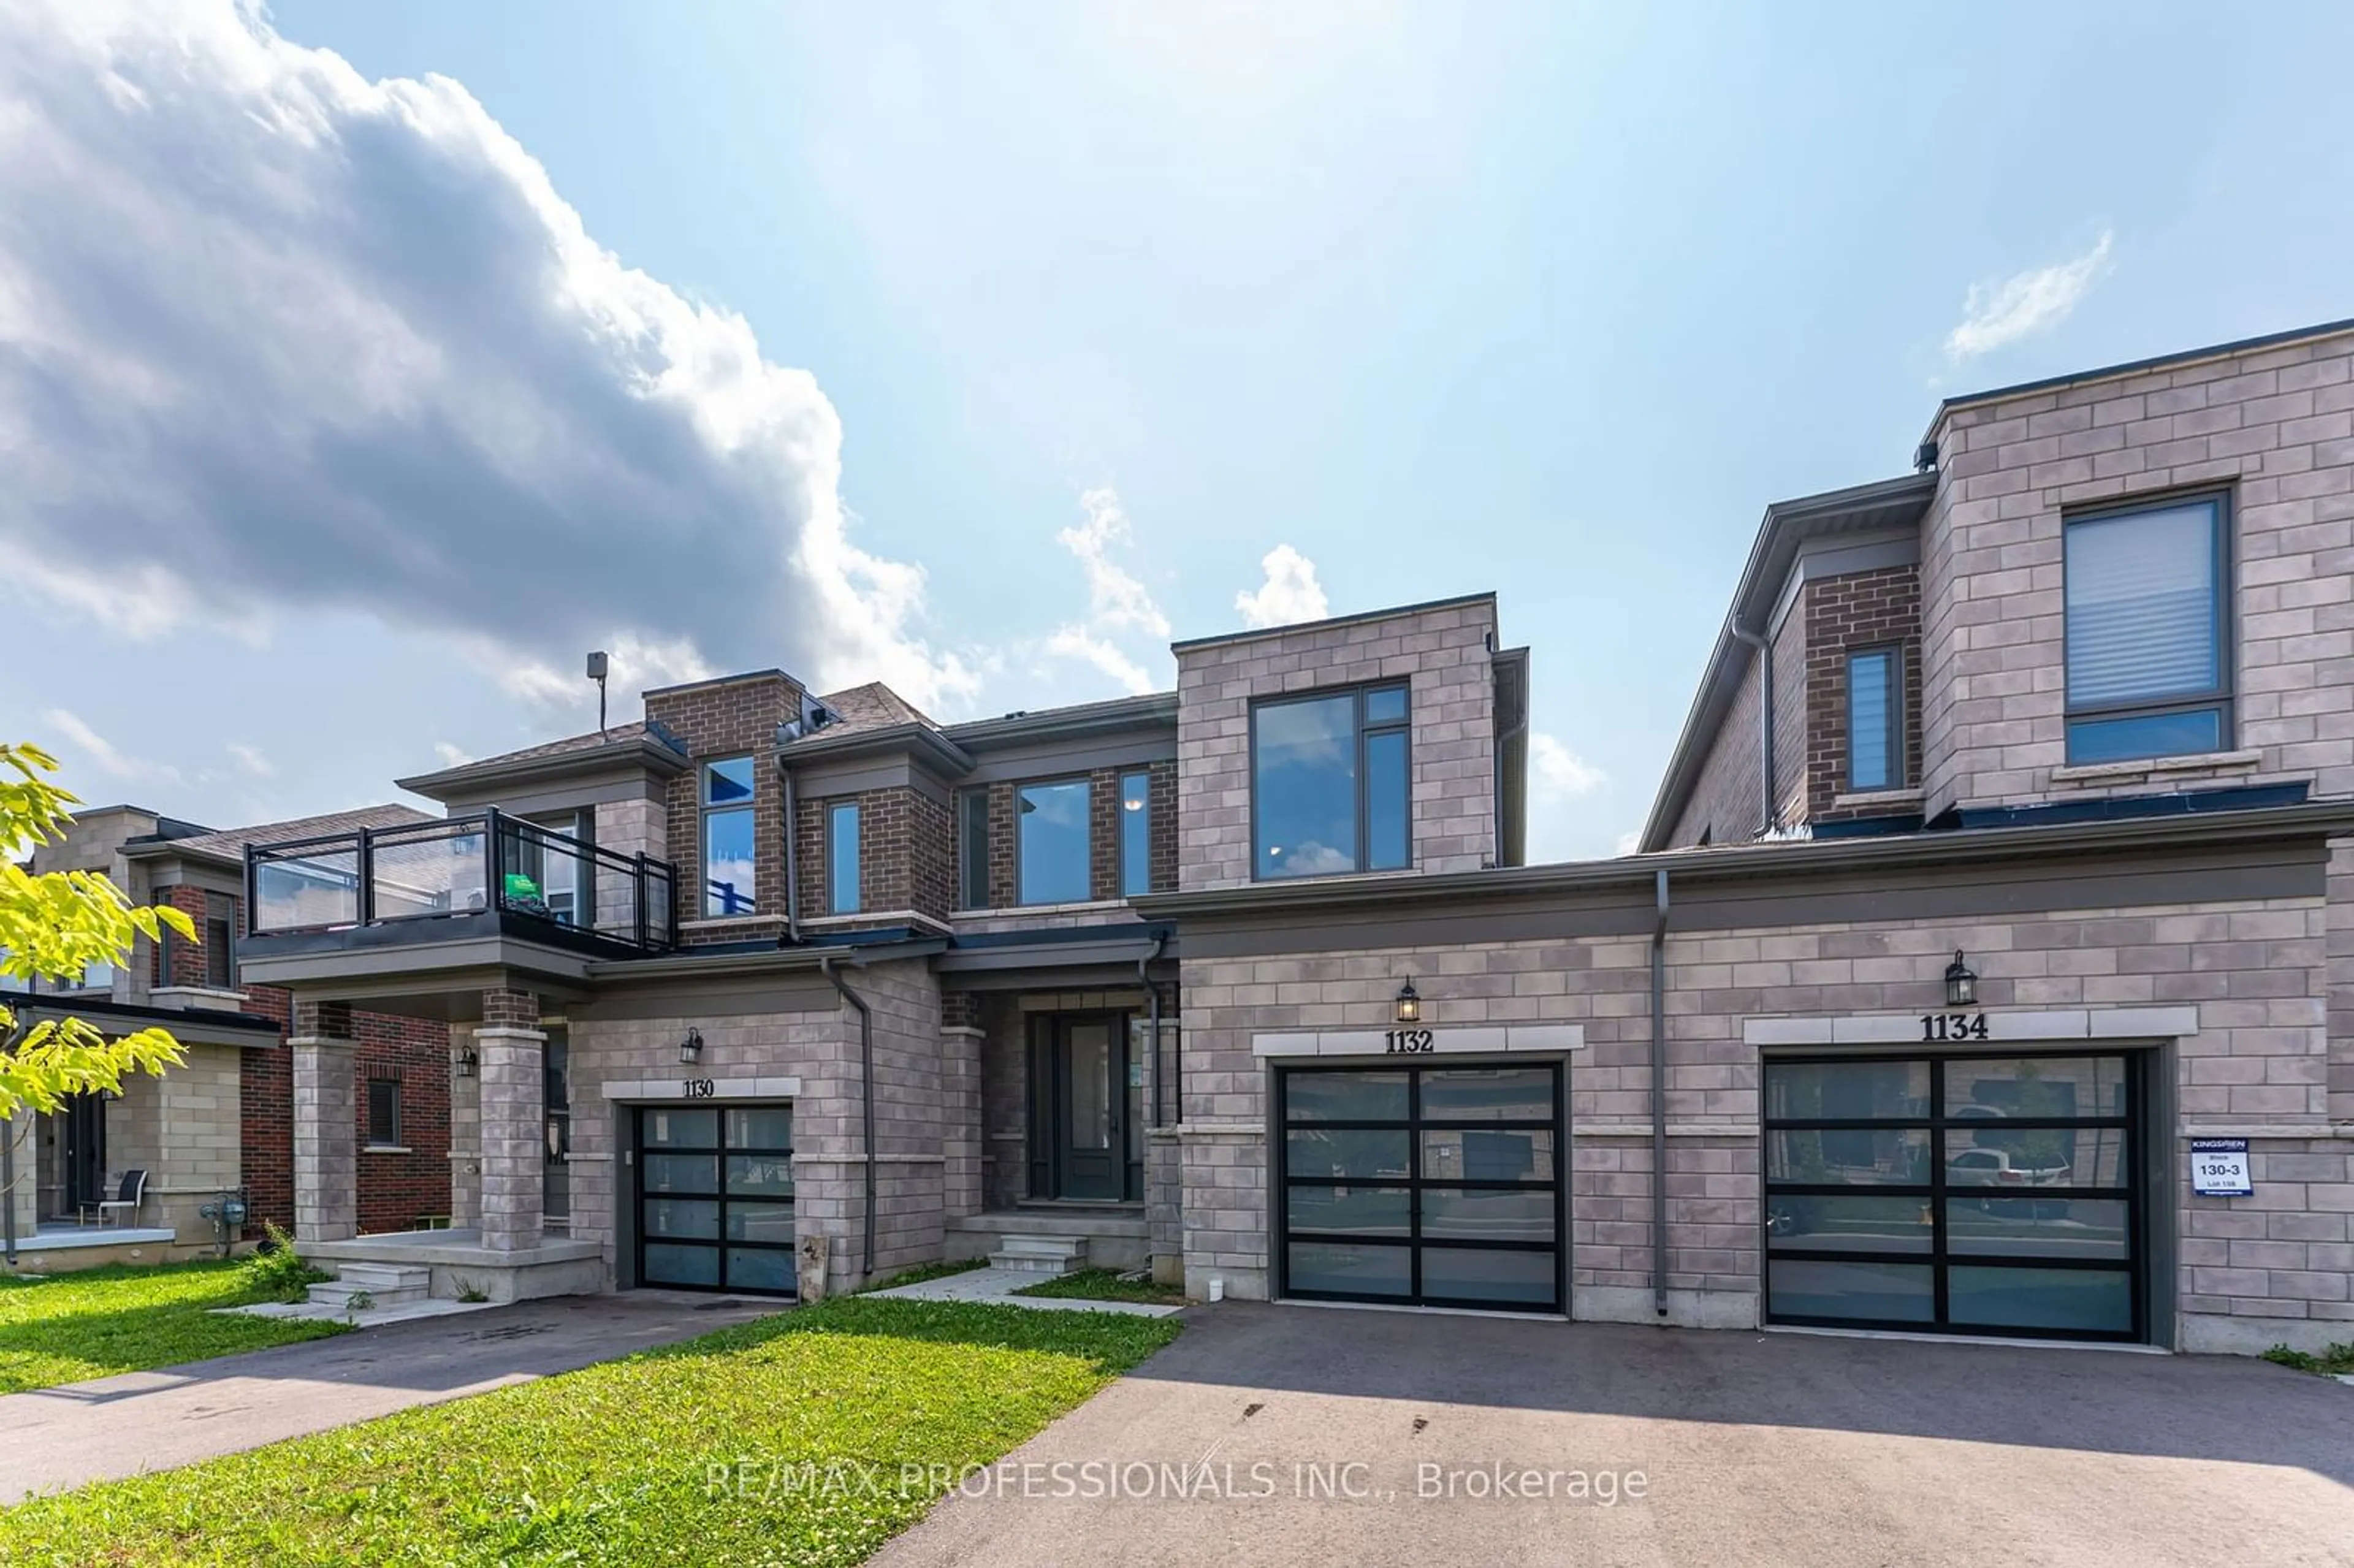 Home with brick exterior material for 1132 Edinburgh Dr, Woodstock Ontario N4T 0G8